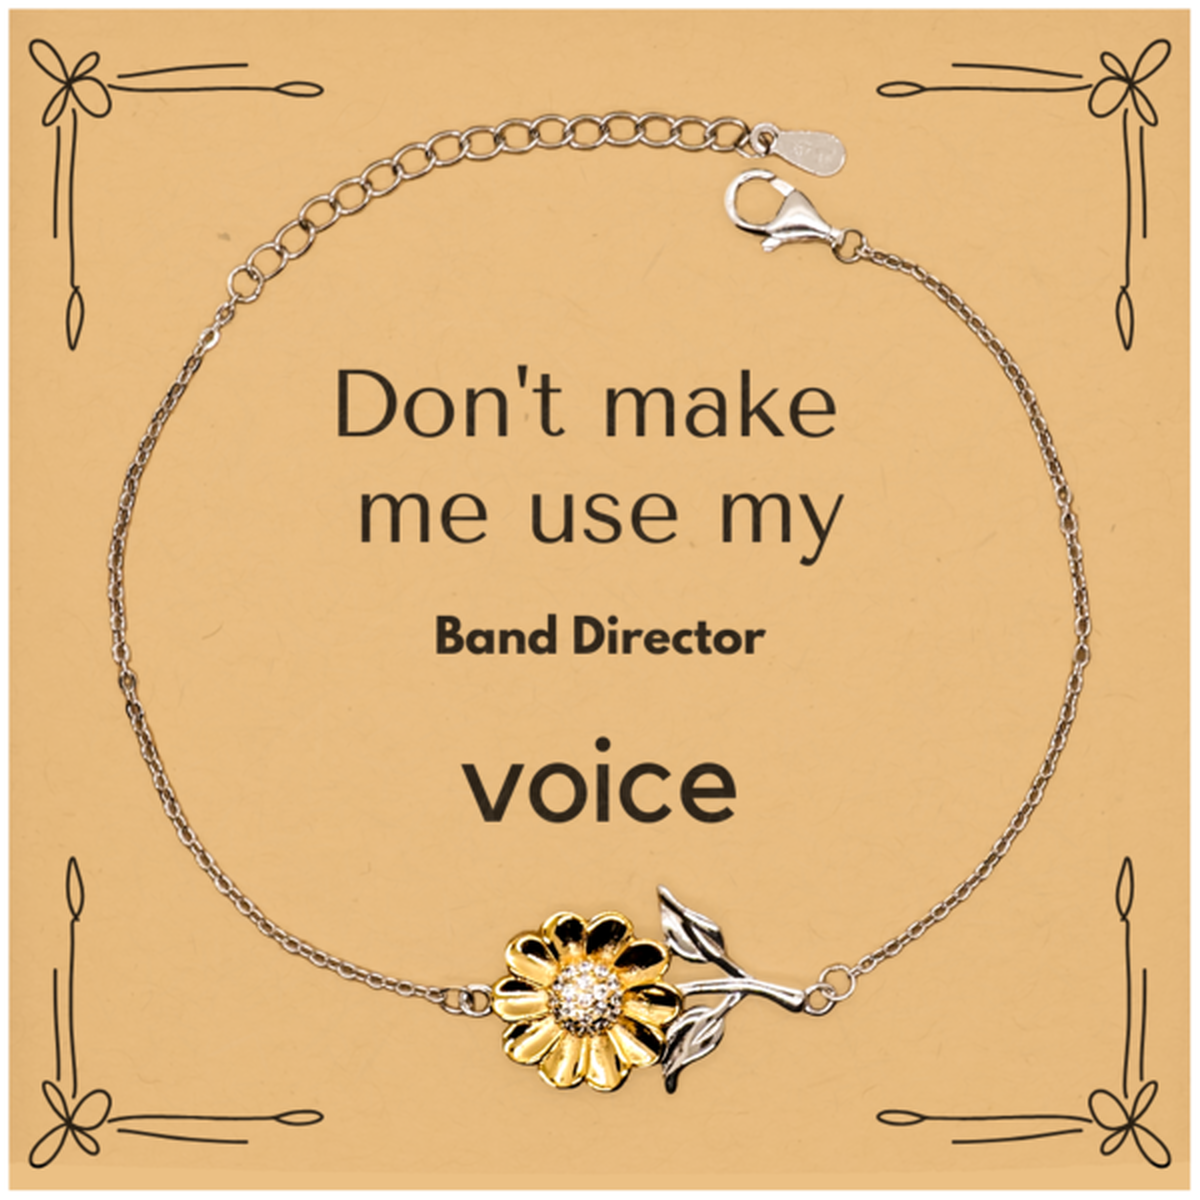 Don't make me use my Band Director voice, Sarcasm Band Director Card Gifts, Christmas Band Director Sunflower Bracelet Birthday Unique Gifts For Band Director Coworkers, Men, Women, Colleague, Friends